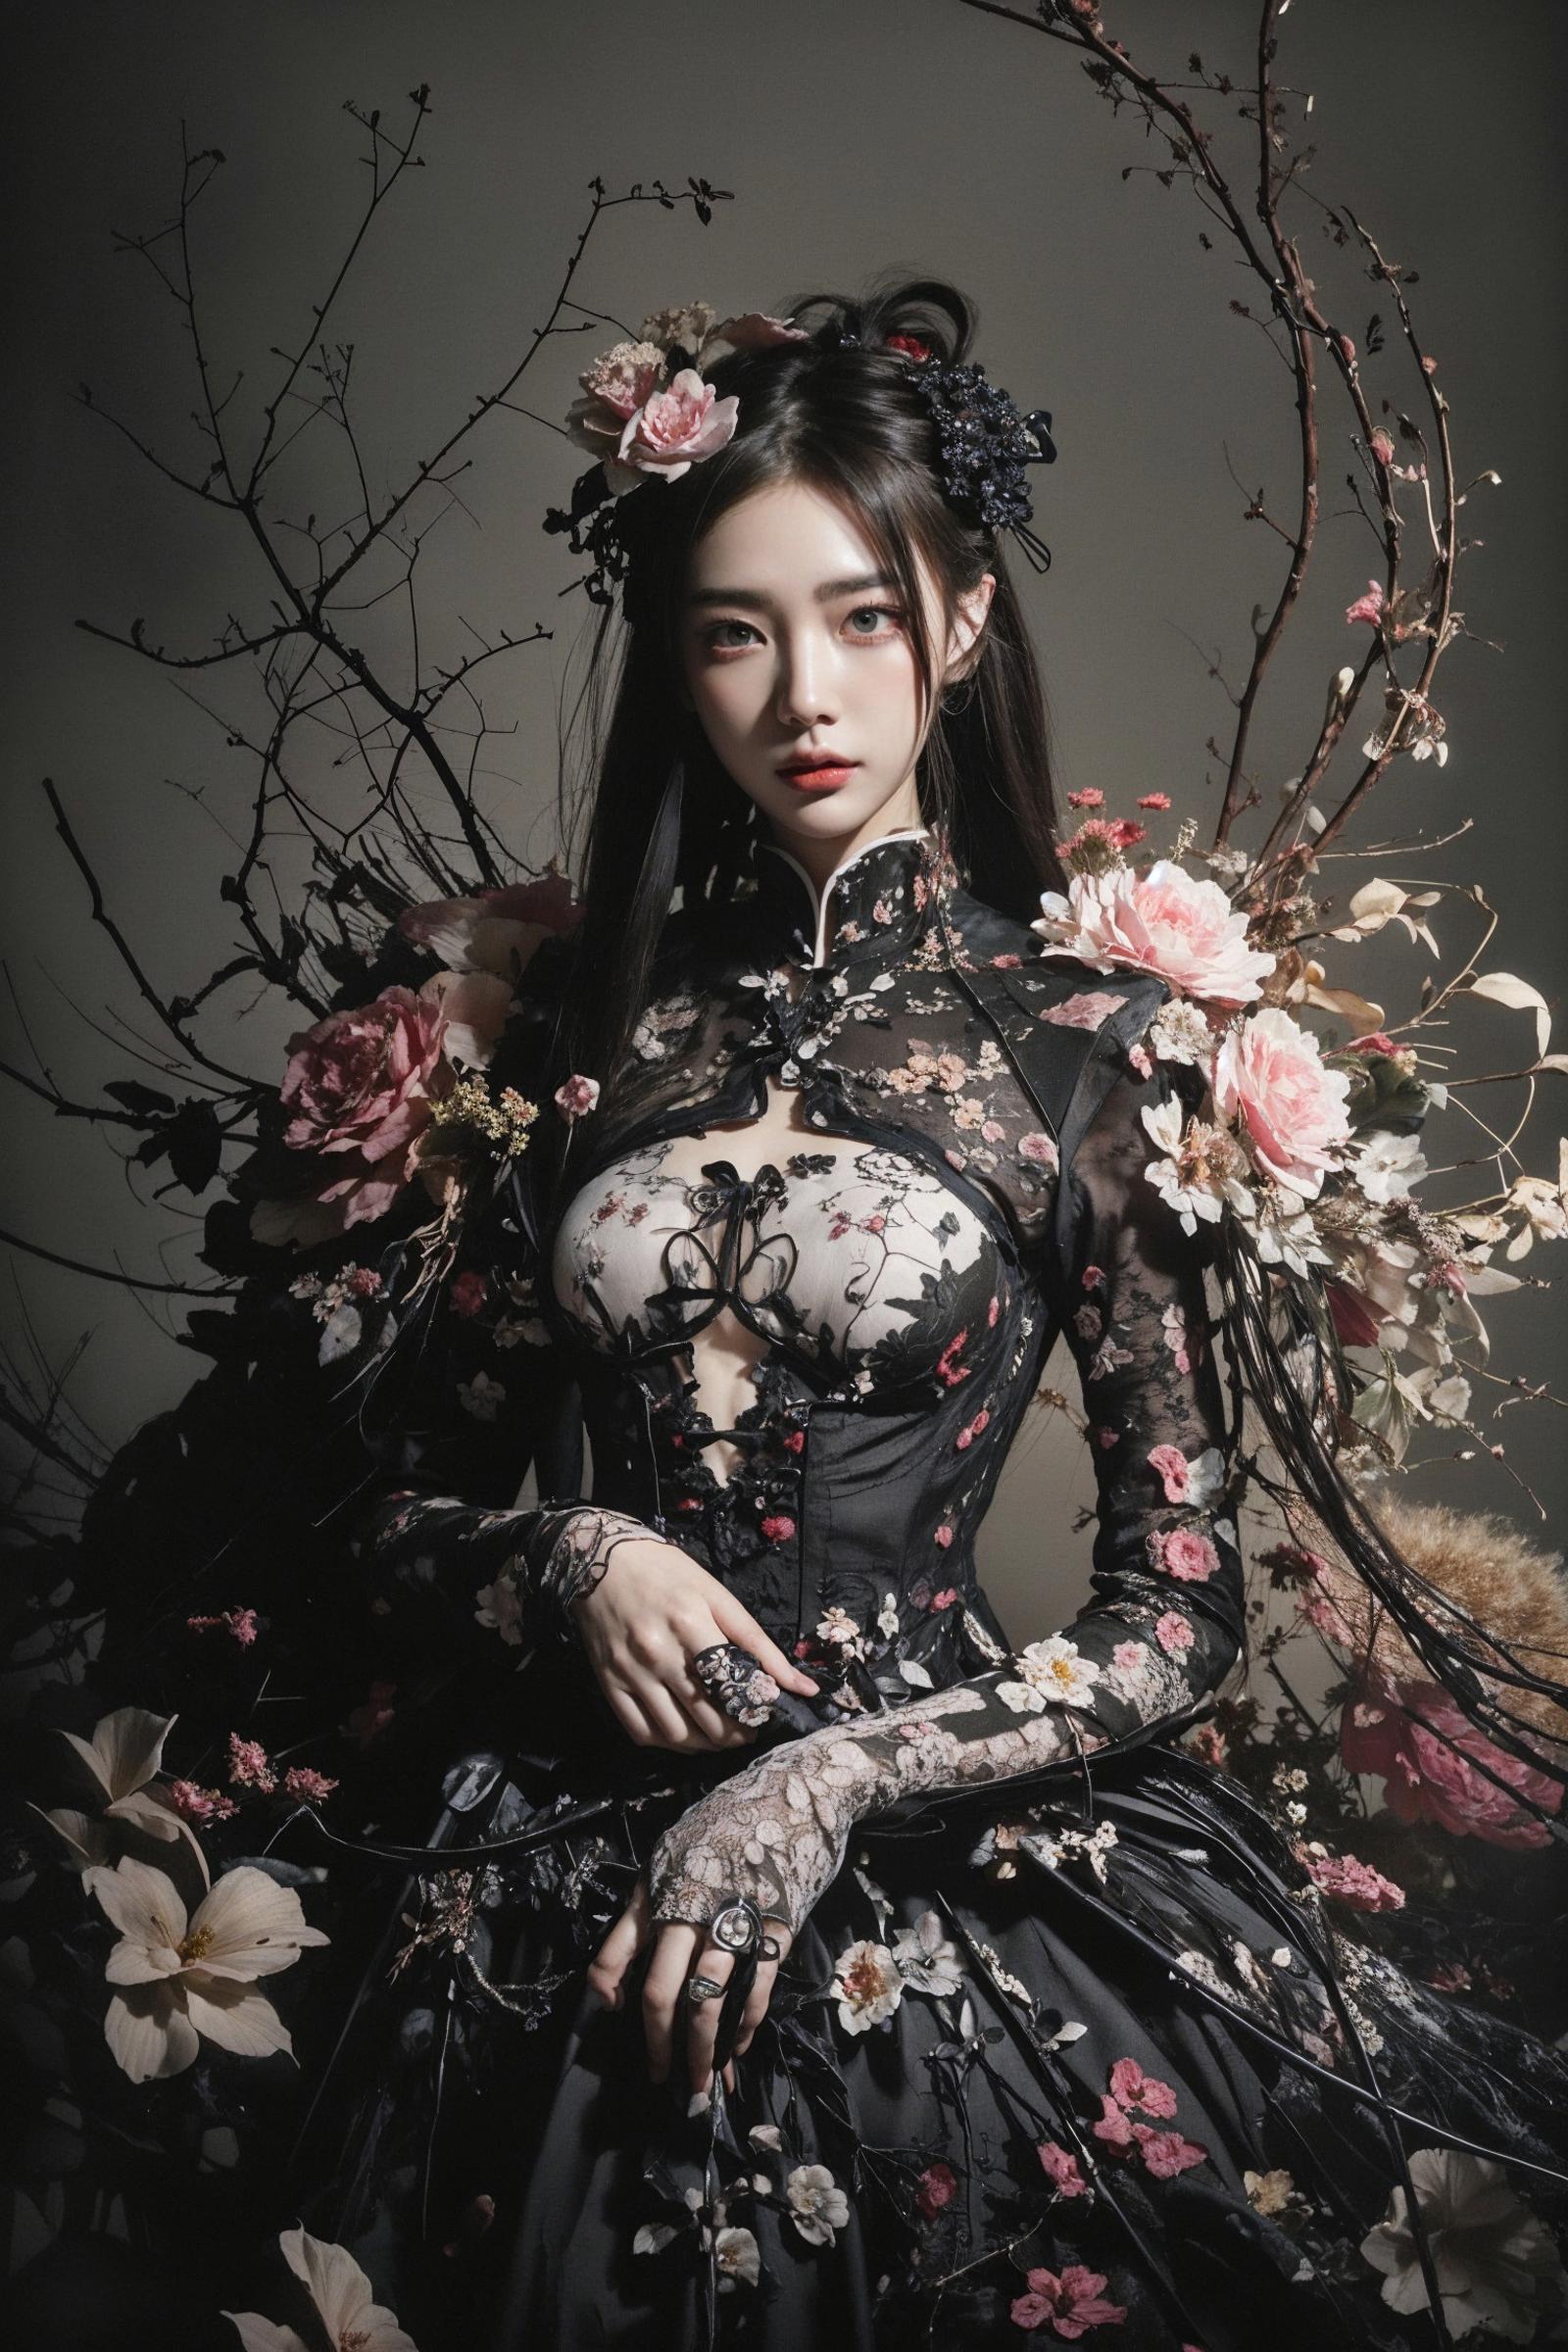 Asian woman wearing a black dress with red flowers and pearls, holding a flower in her hand.